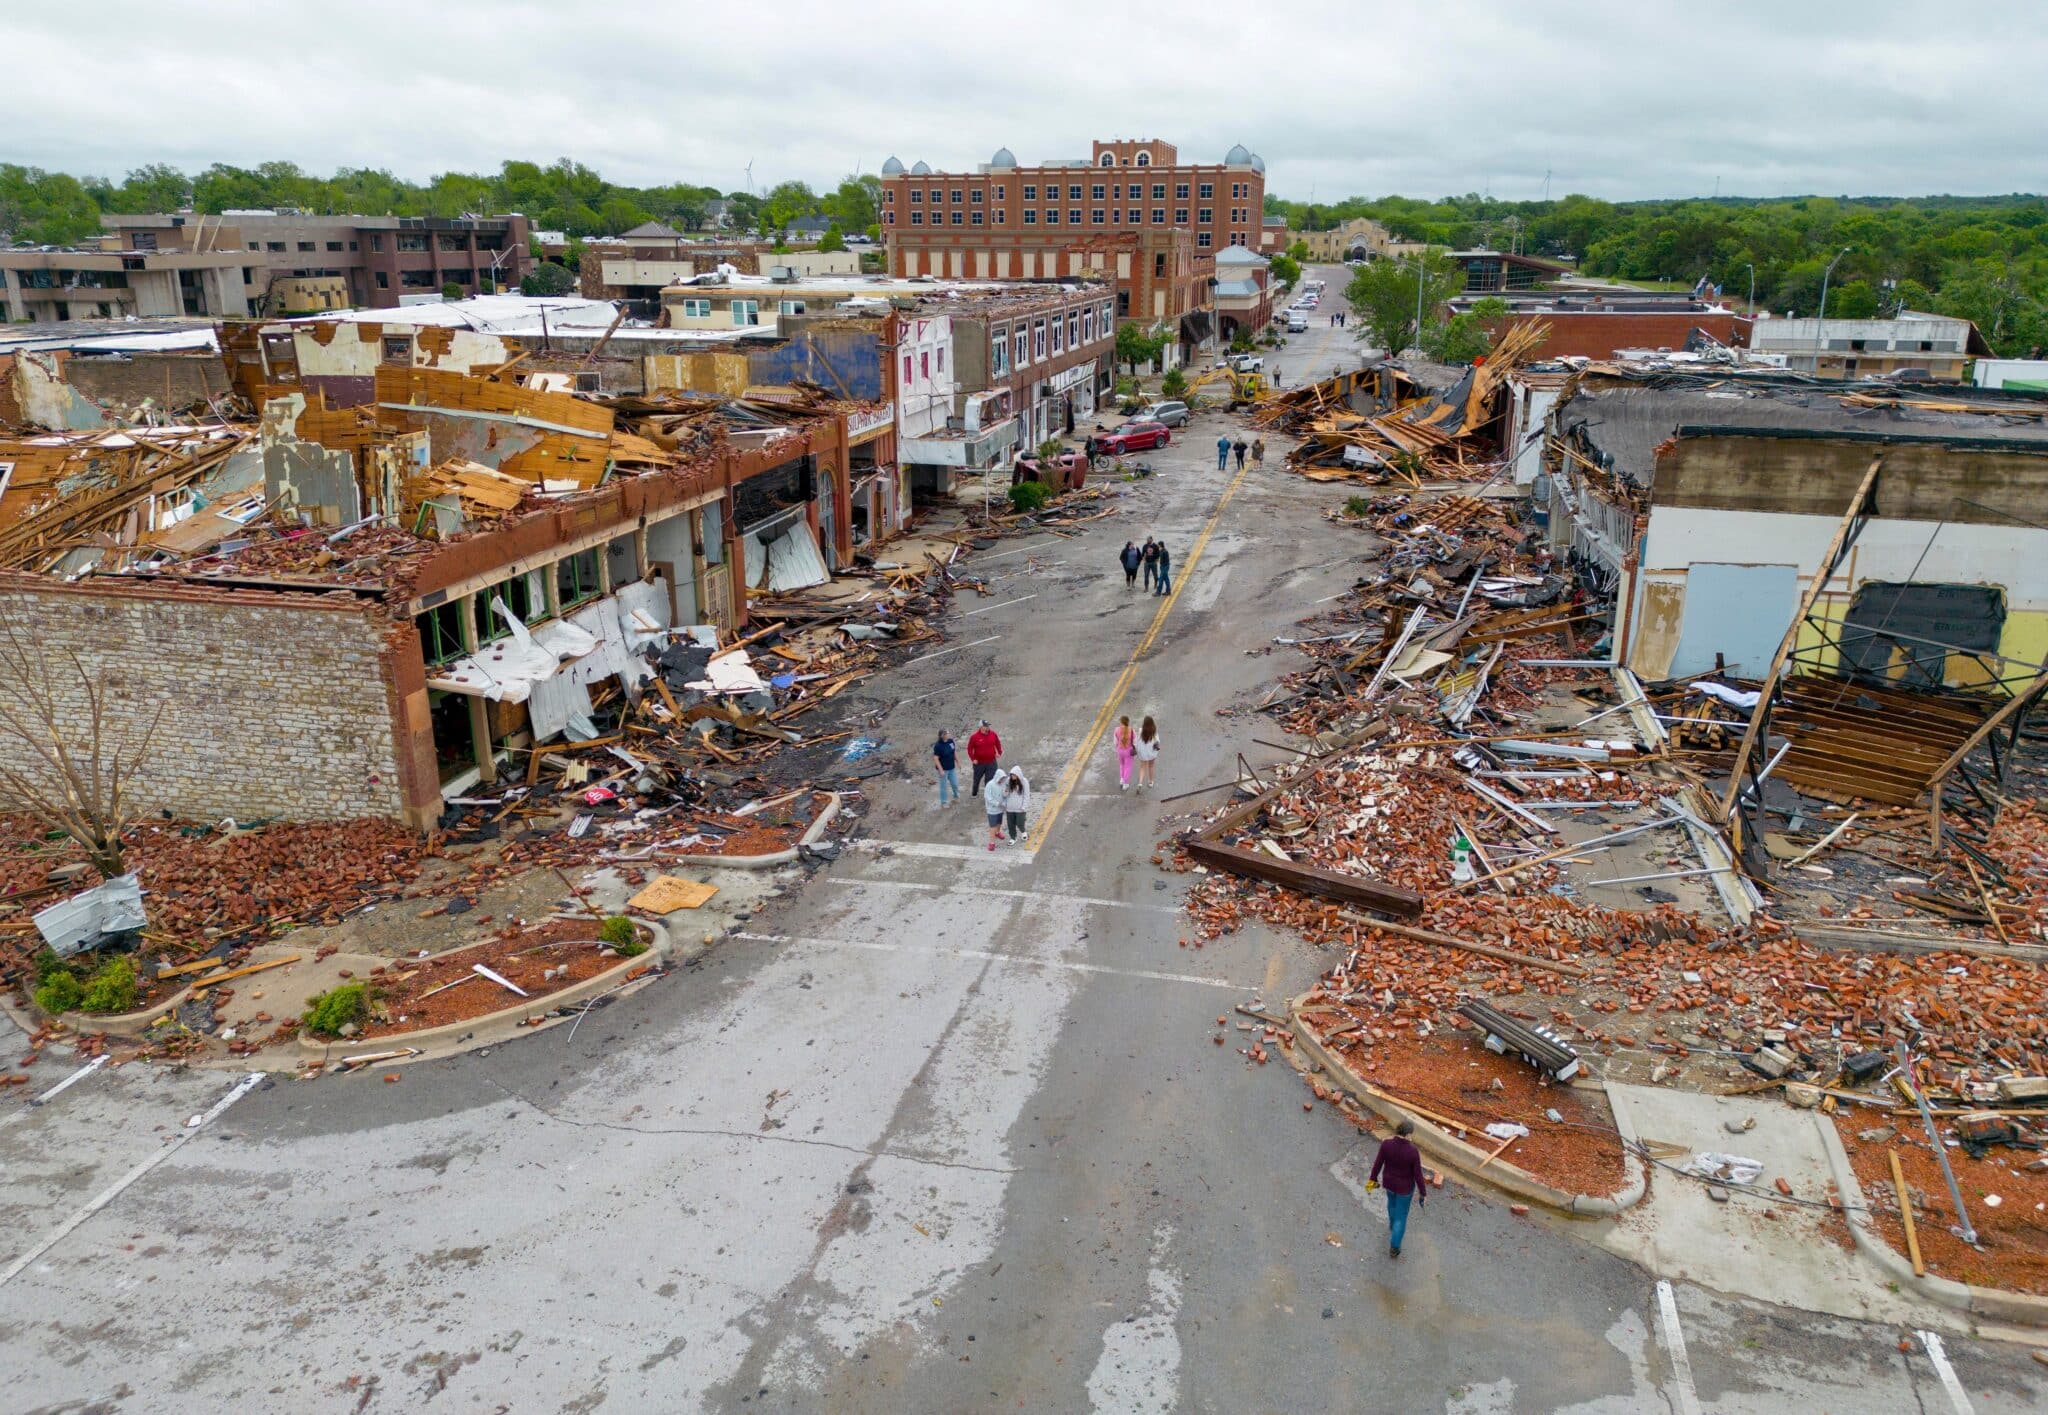 Damaged buildings are seen in Sulphur, Okla., April 28, 2024, after the town was hit by a tornado the night before. Tornadoes killed at least four people in Oklahoma, including an infant, and left thousands without power after a destructive outbreak of severe weather flattened buildings in the heart of the rural town of Sulphur and injured at least 100 people across the state. (OSV News photo/Bryan Terry, The Oklahoman/USA Today Network via Reuters)